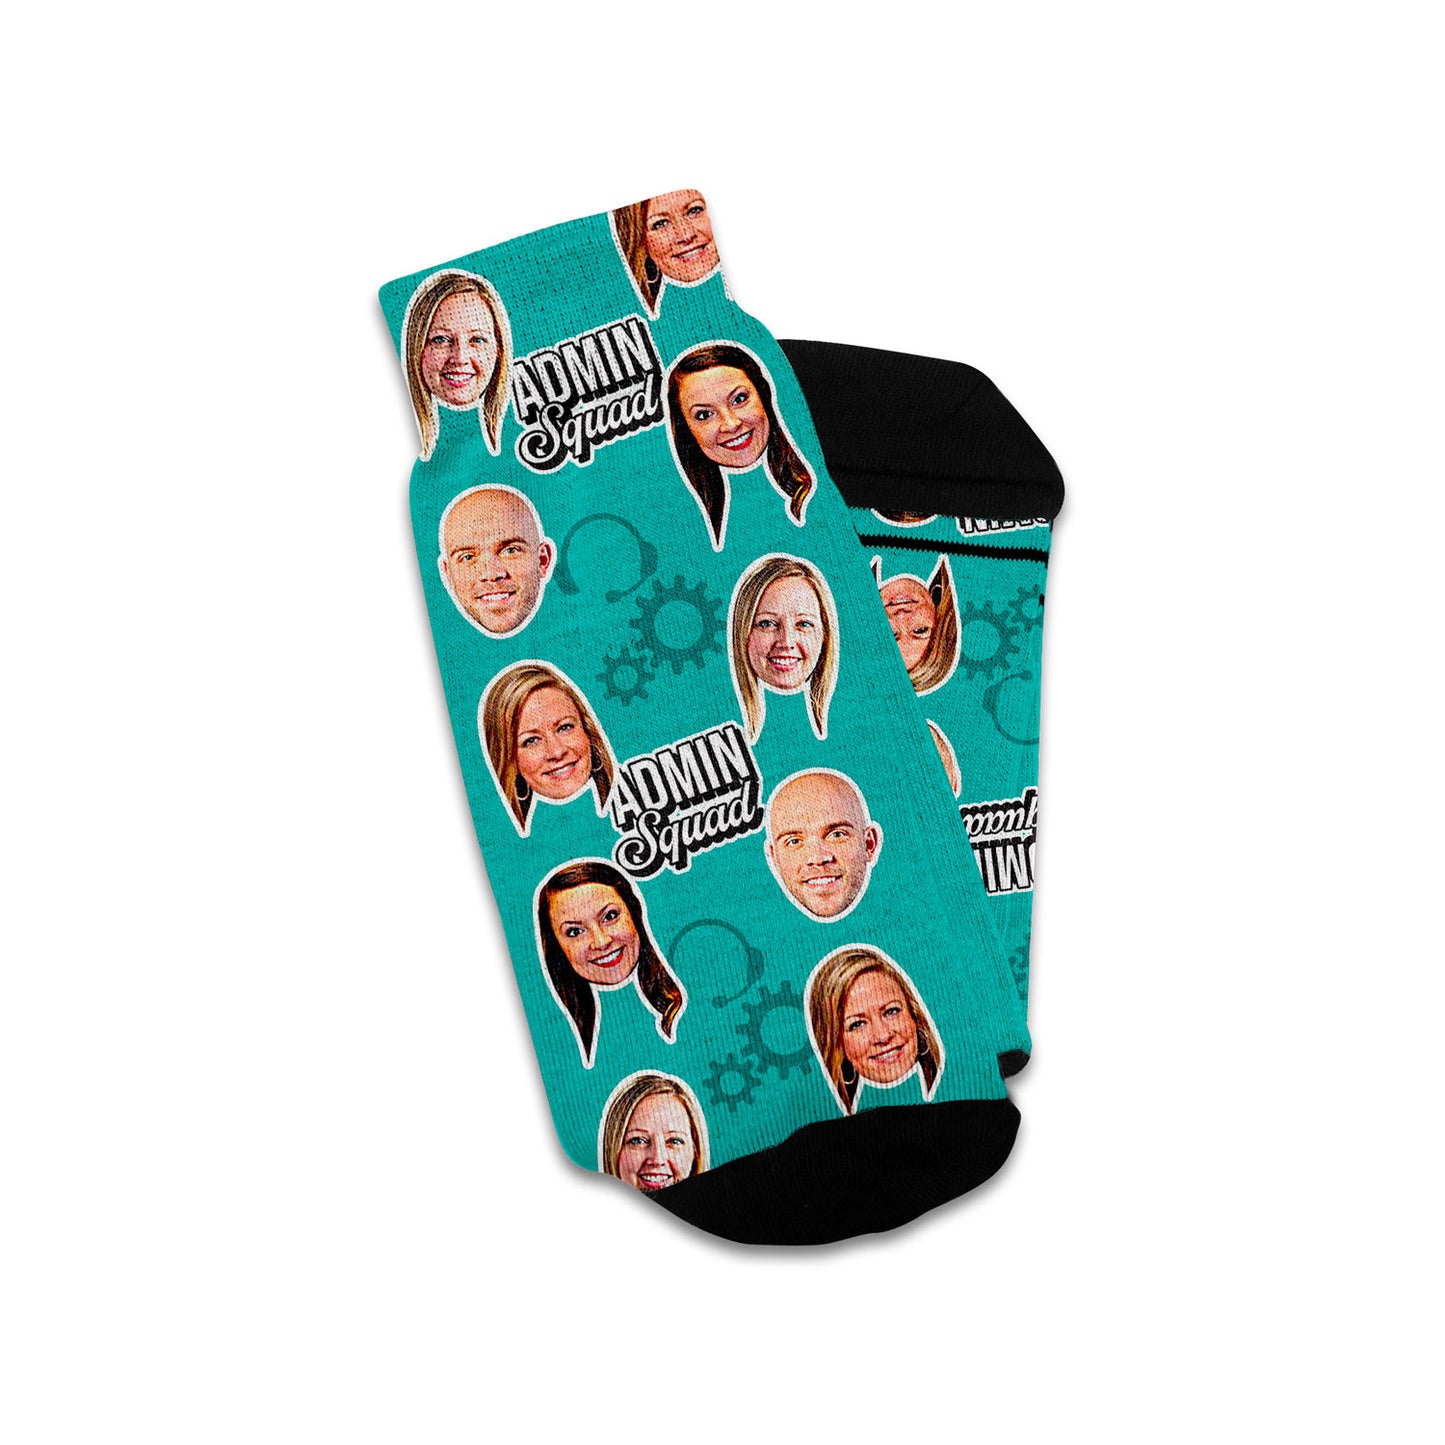 admin assistant gifts personalized socks with faces